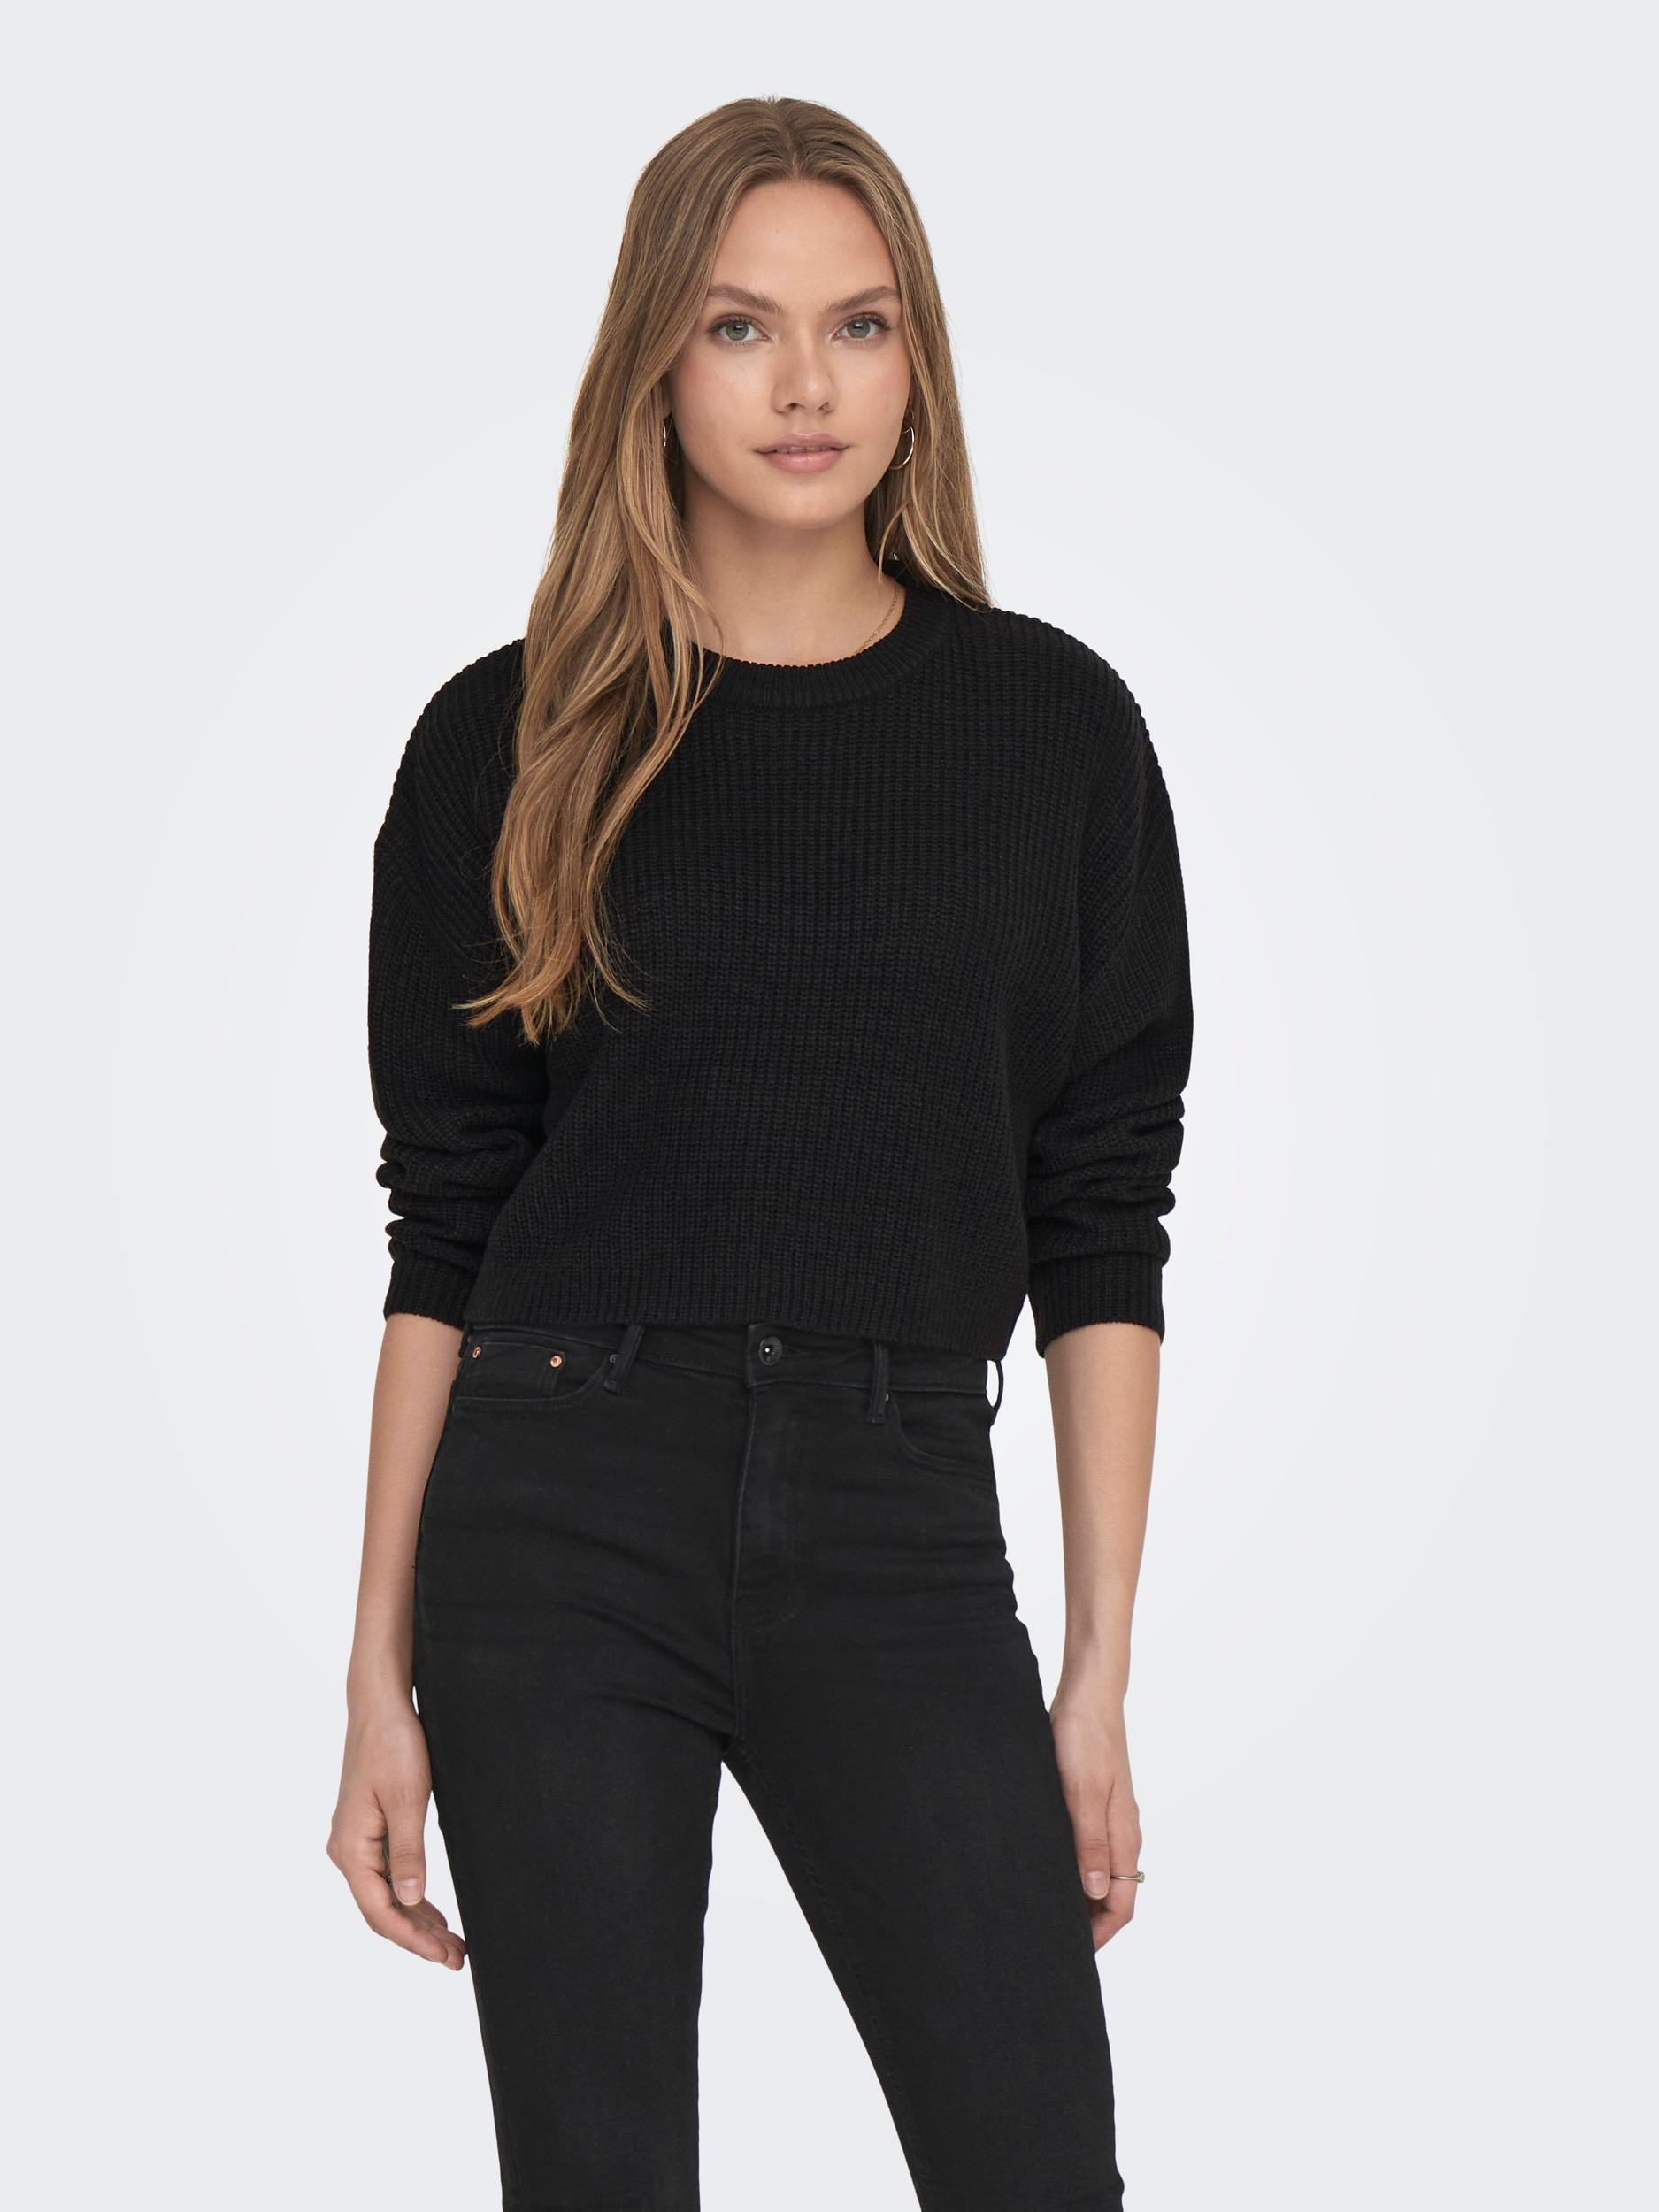 Only - Ribbed pullover, Black, large image number 4